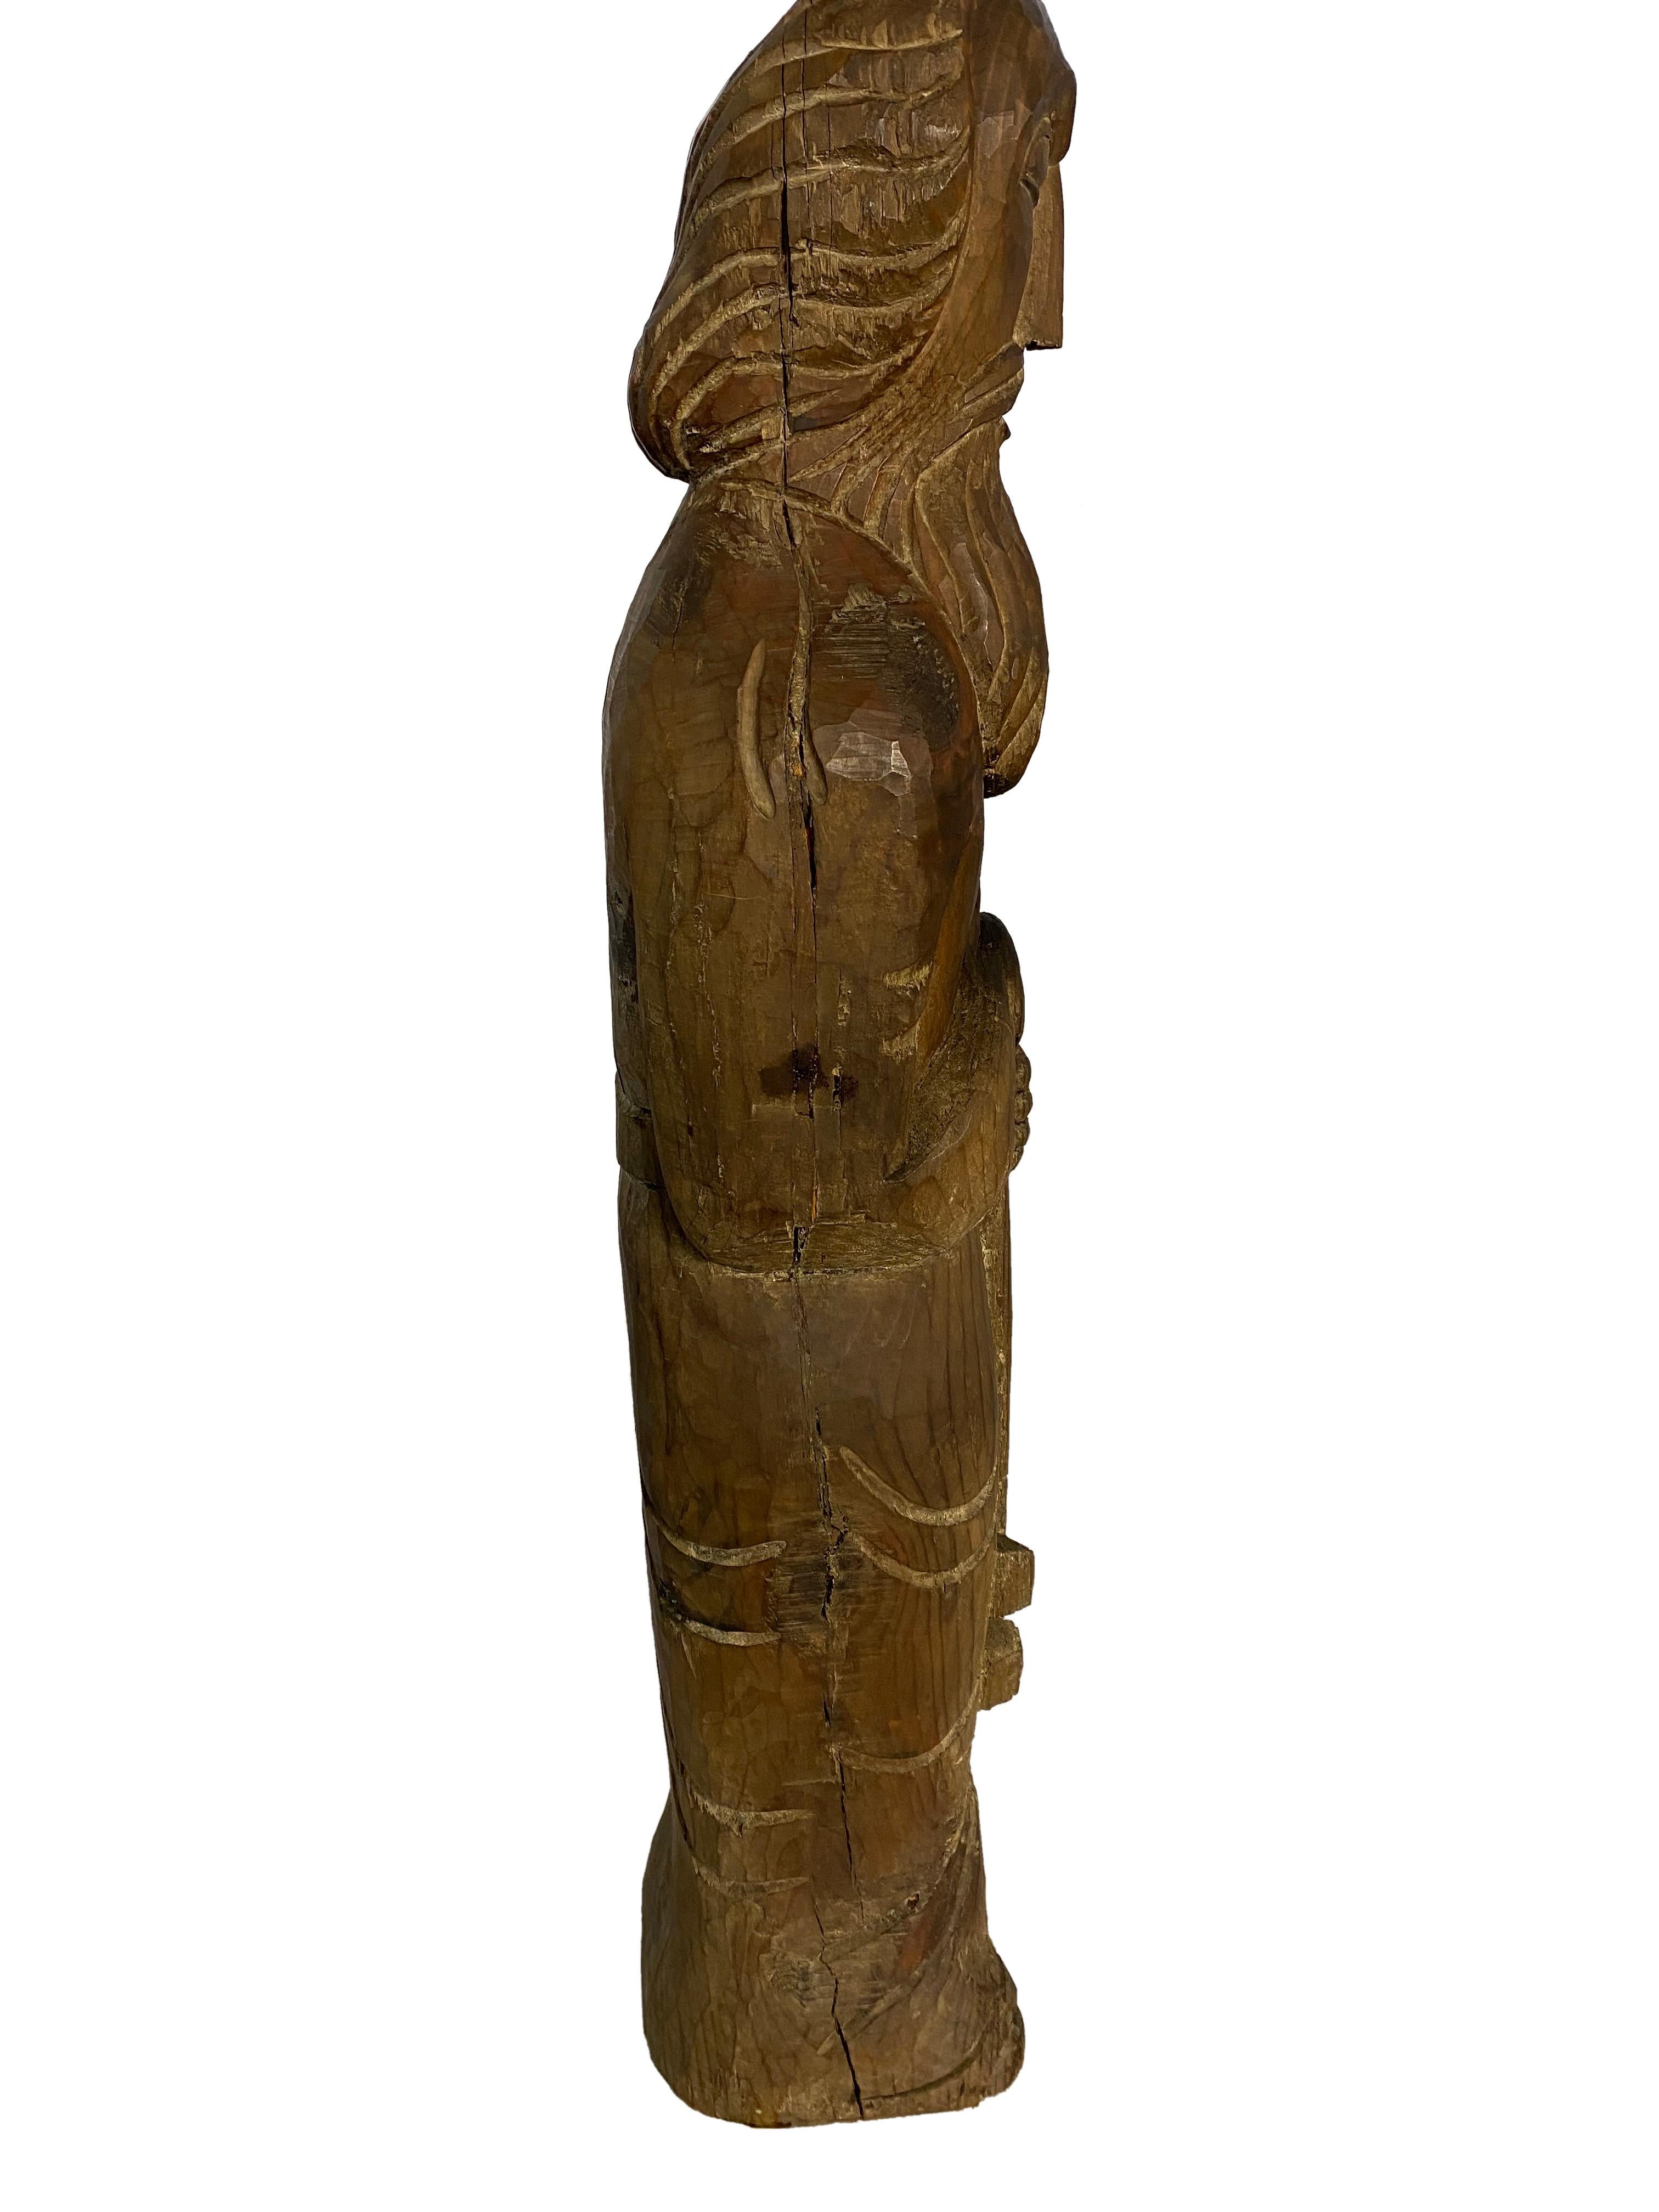 Wooden Church Figure of Saint Peter, 18th-19th Century For Sale 1